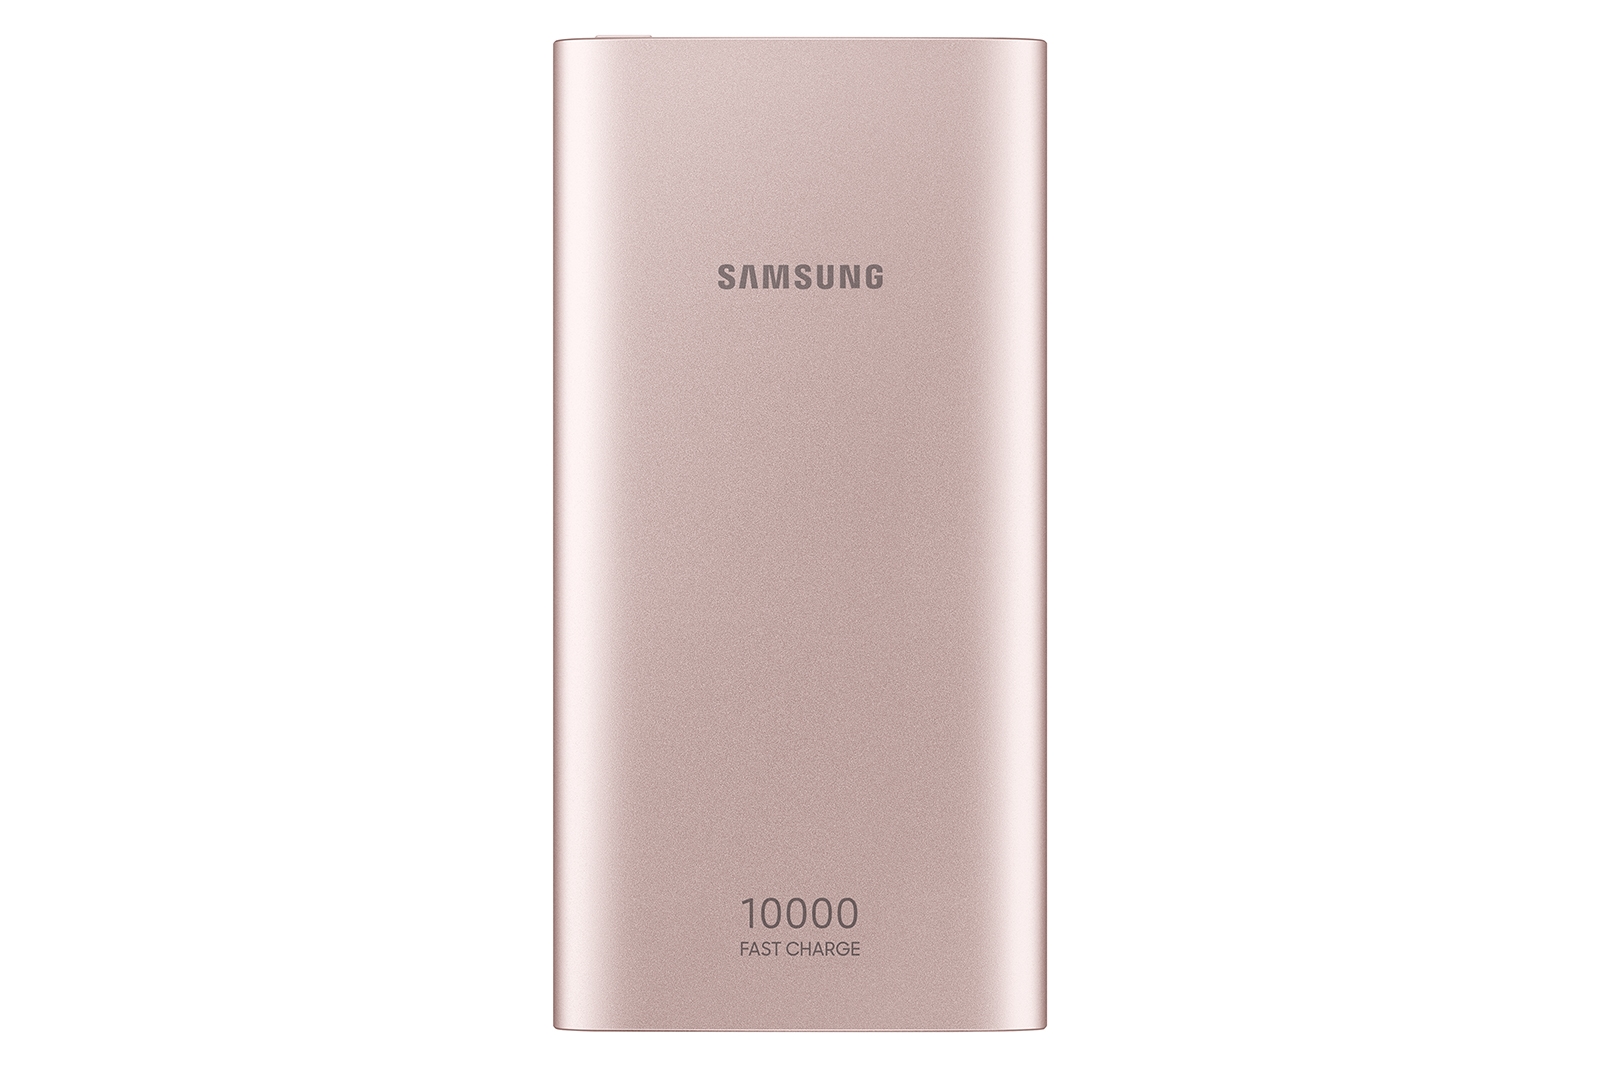 Thumbnail image of 10,000 mAh Portable Battery with Micro USB Cable, Pink